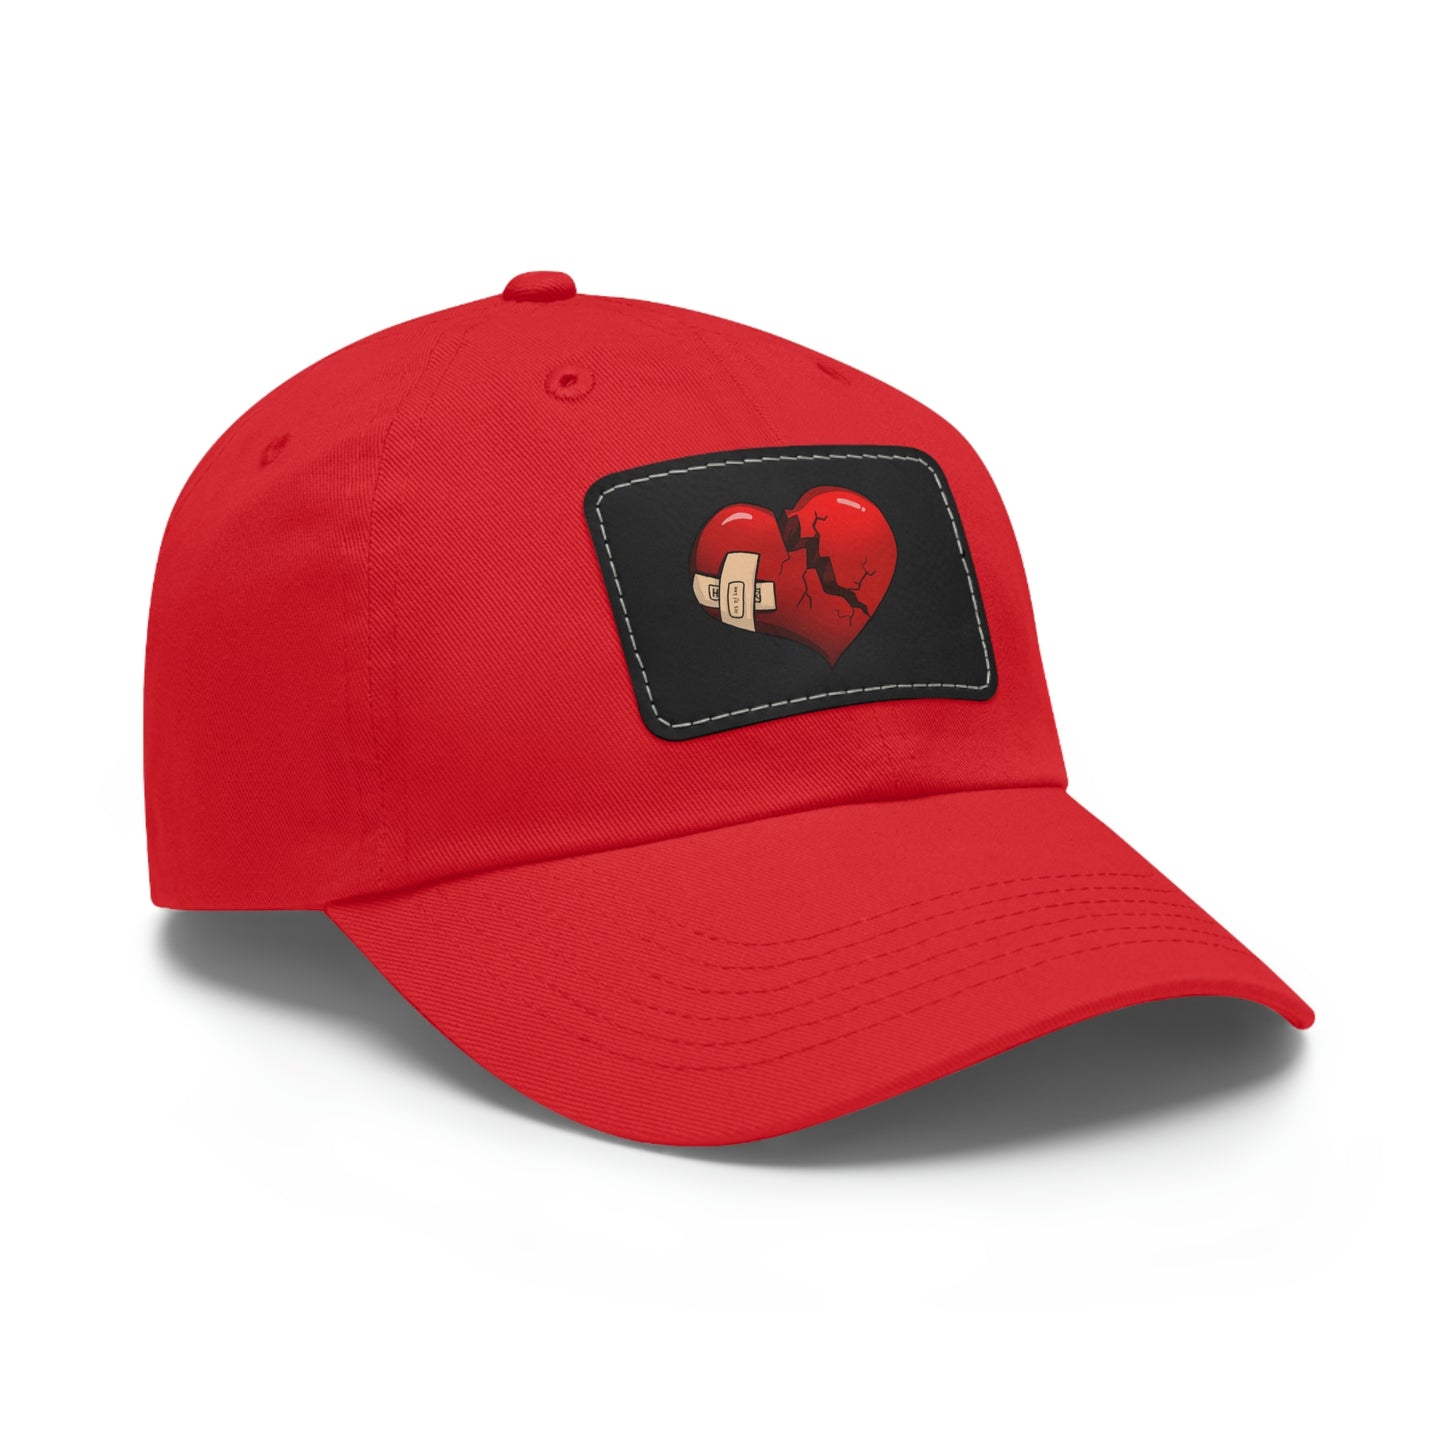 "Hopstar" Dad Hat with Leather Patch